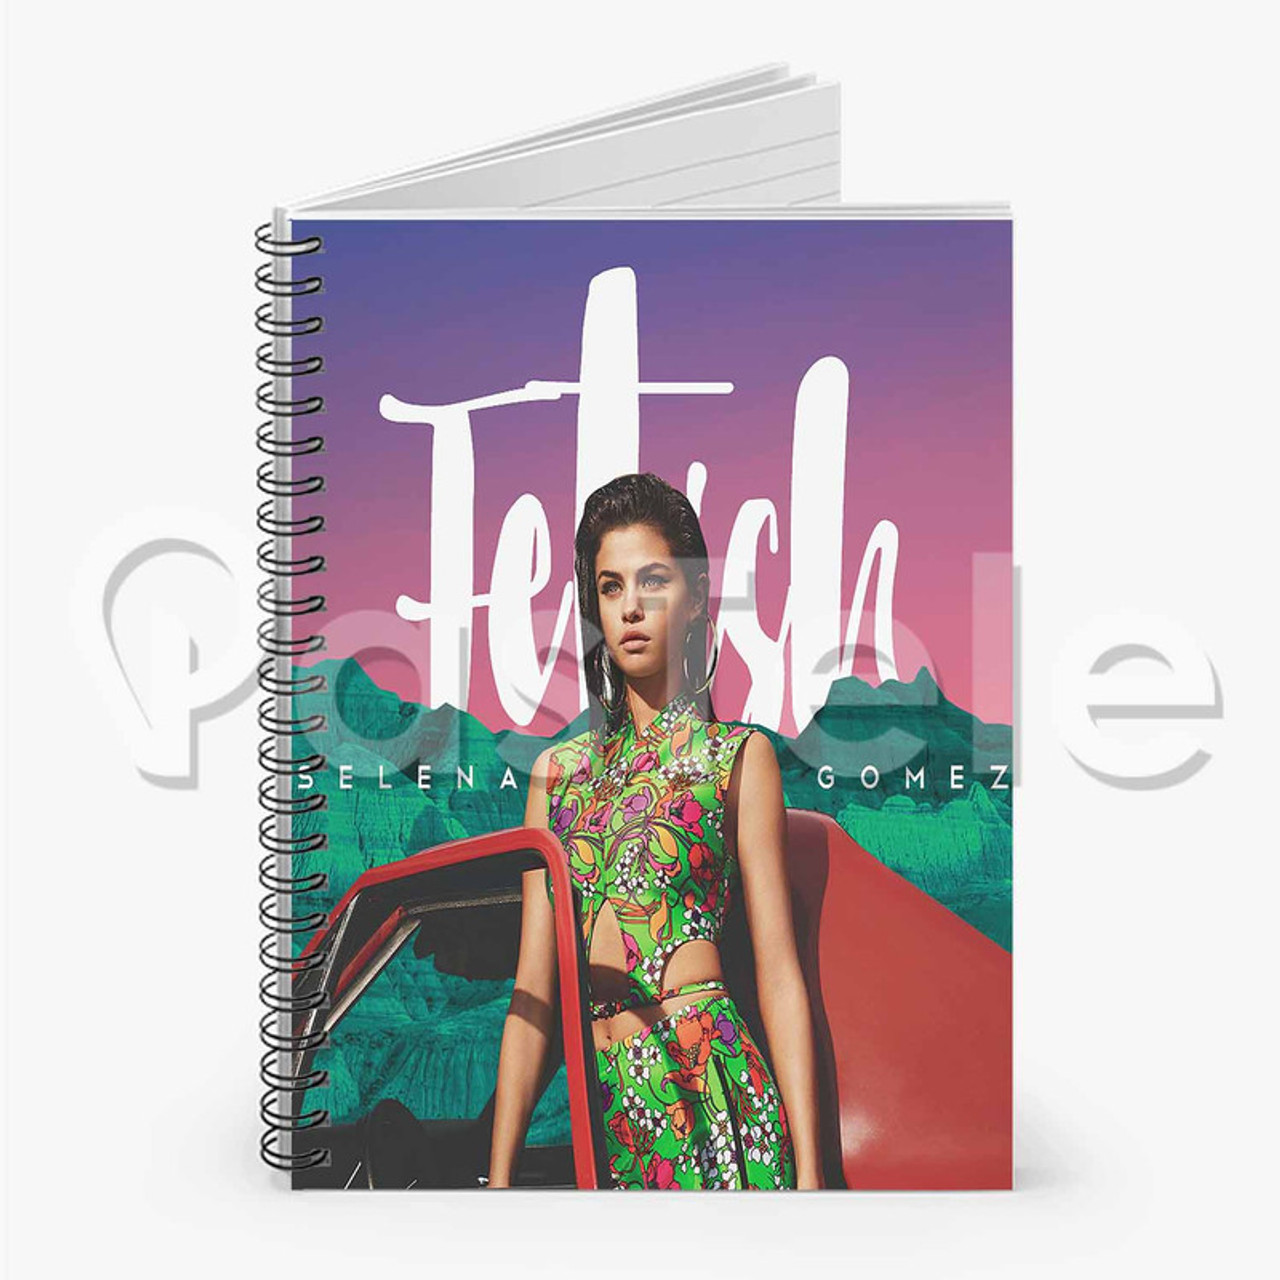 Selena Gomez Fetish ft Gucci Mane Custom Personalized Spiral Notebook Cover  Prin Ruled Line Book